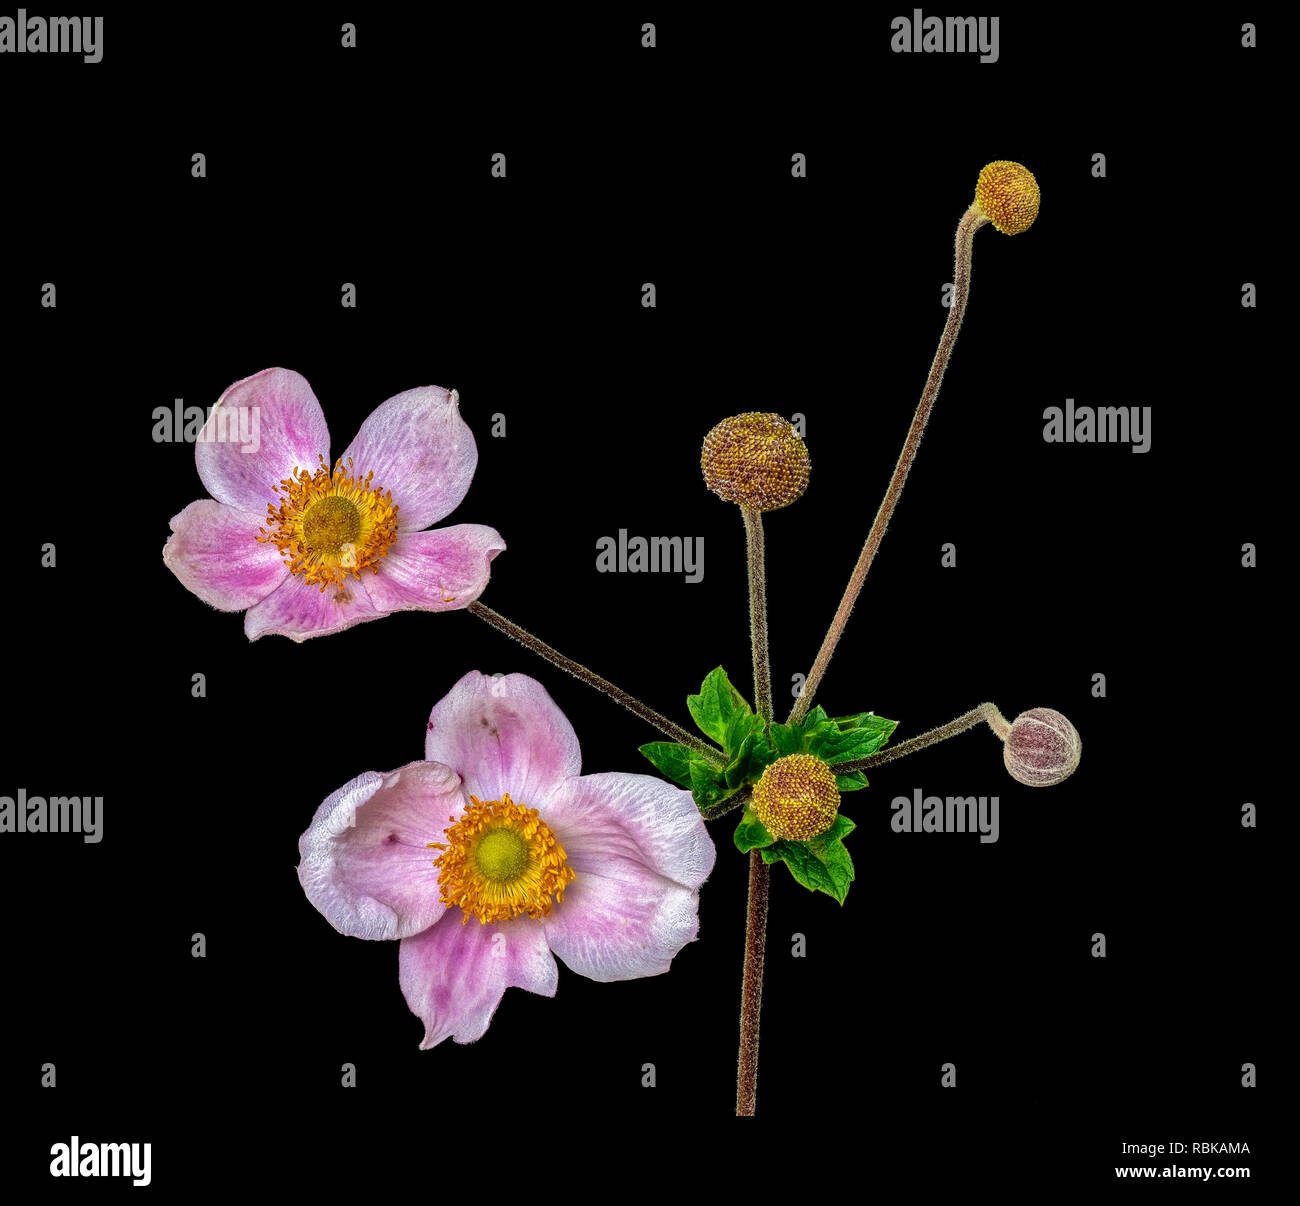 Color fine art still life floral macro flower image of a single isolated pink white autumn anemone with two blossoms and four buds, black background Stock Photo